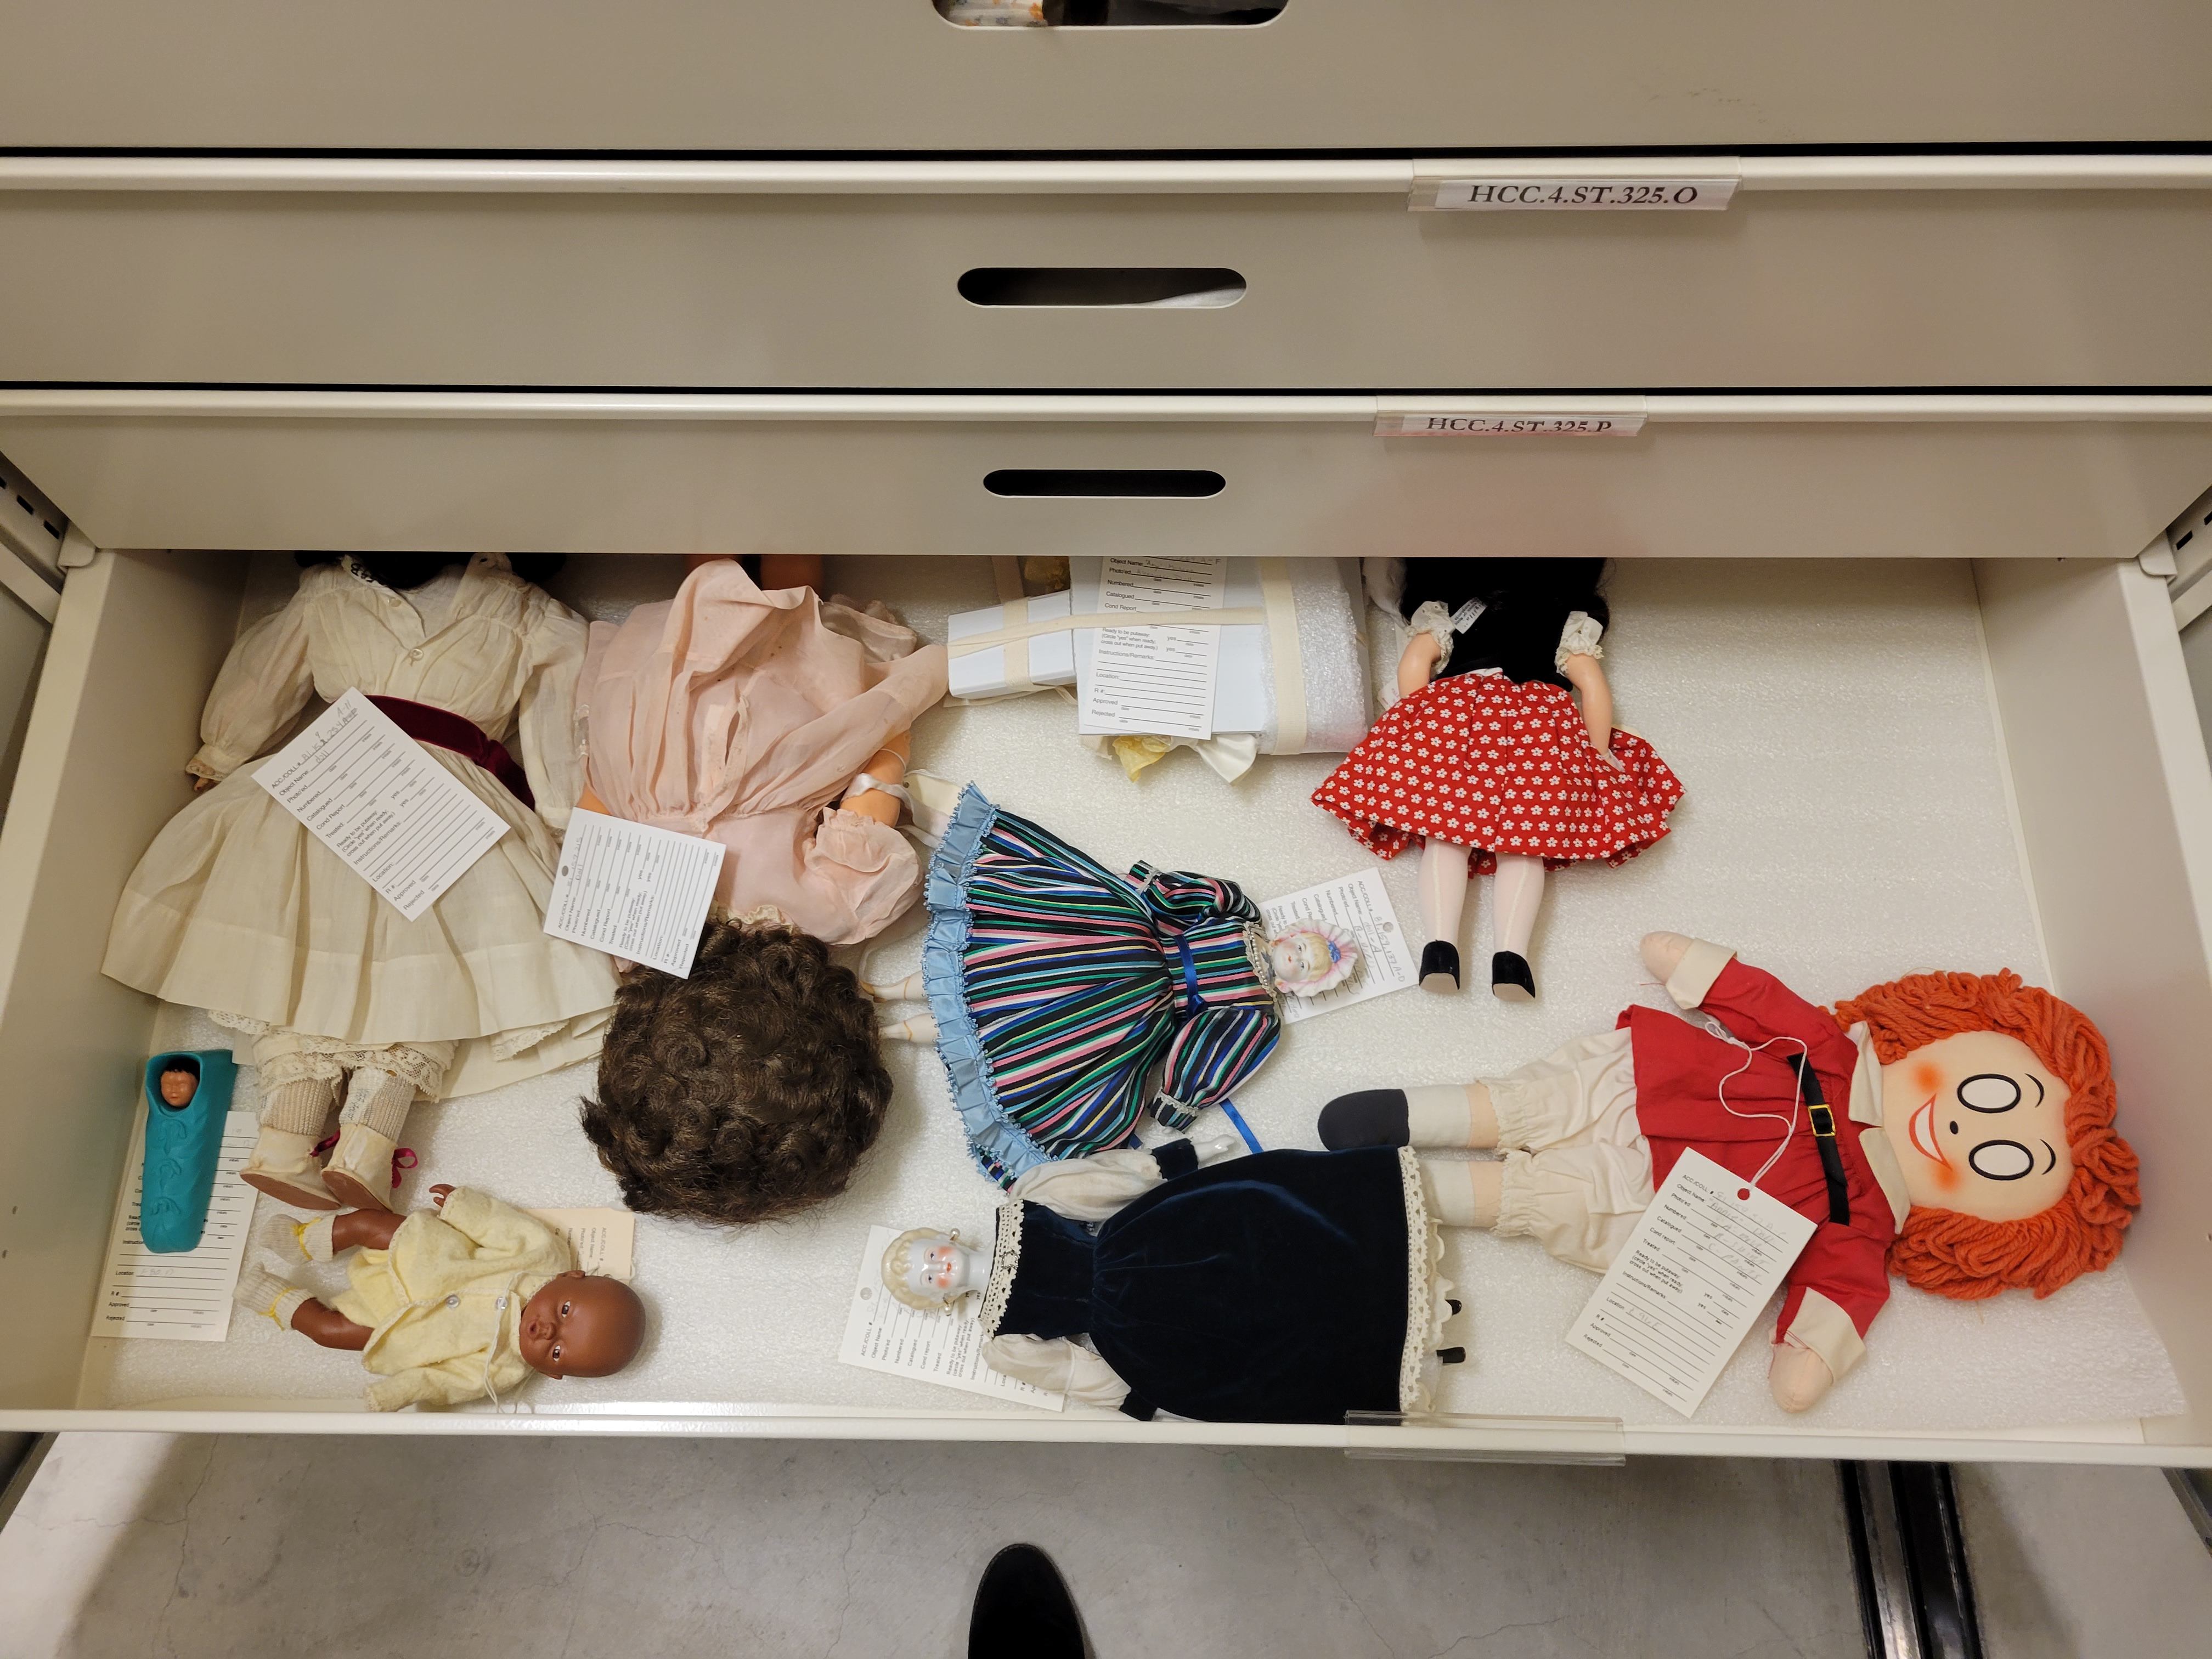 Photo of white metal storage drawers, and the fourth one has been pulled out. Inside the viewer can see several dolls of various sizes, ages, and ethnicities. On the left is a small dark-skinned baby doll, and on the right is a red-haired doll with large white empty ovals for eyes, its face printed on the cloth head. Other dolls in the drawer have fancy dresses in stripes, velvet, and polka dots.